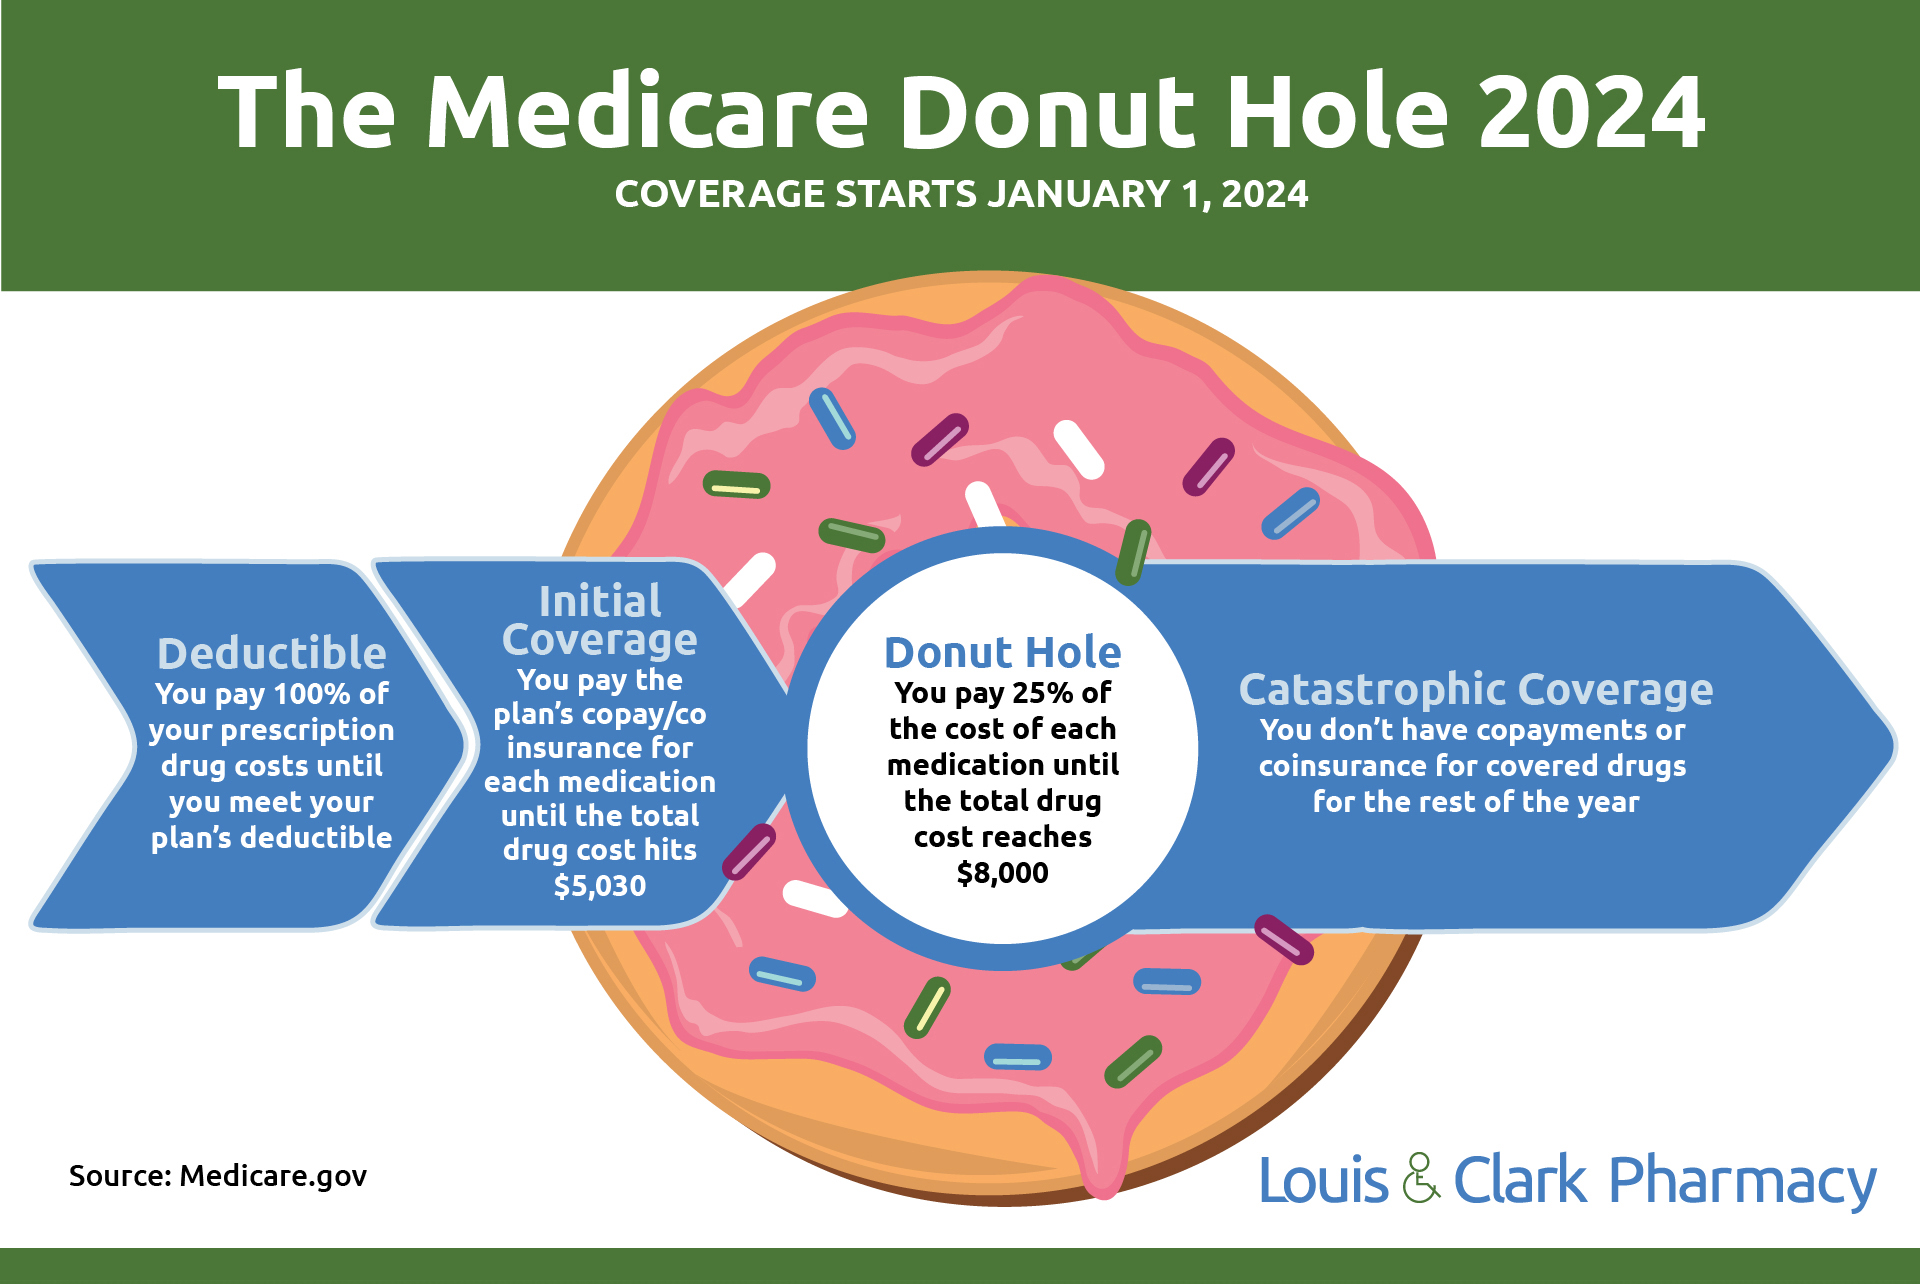 The Medicare Donut Hole 2024